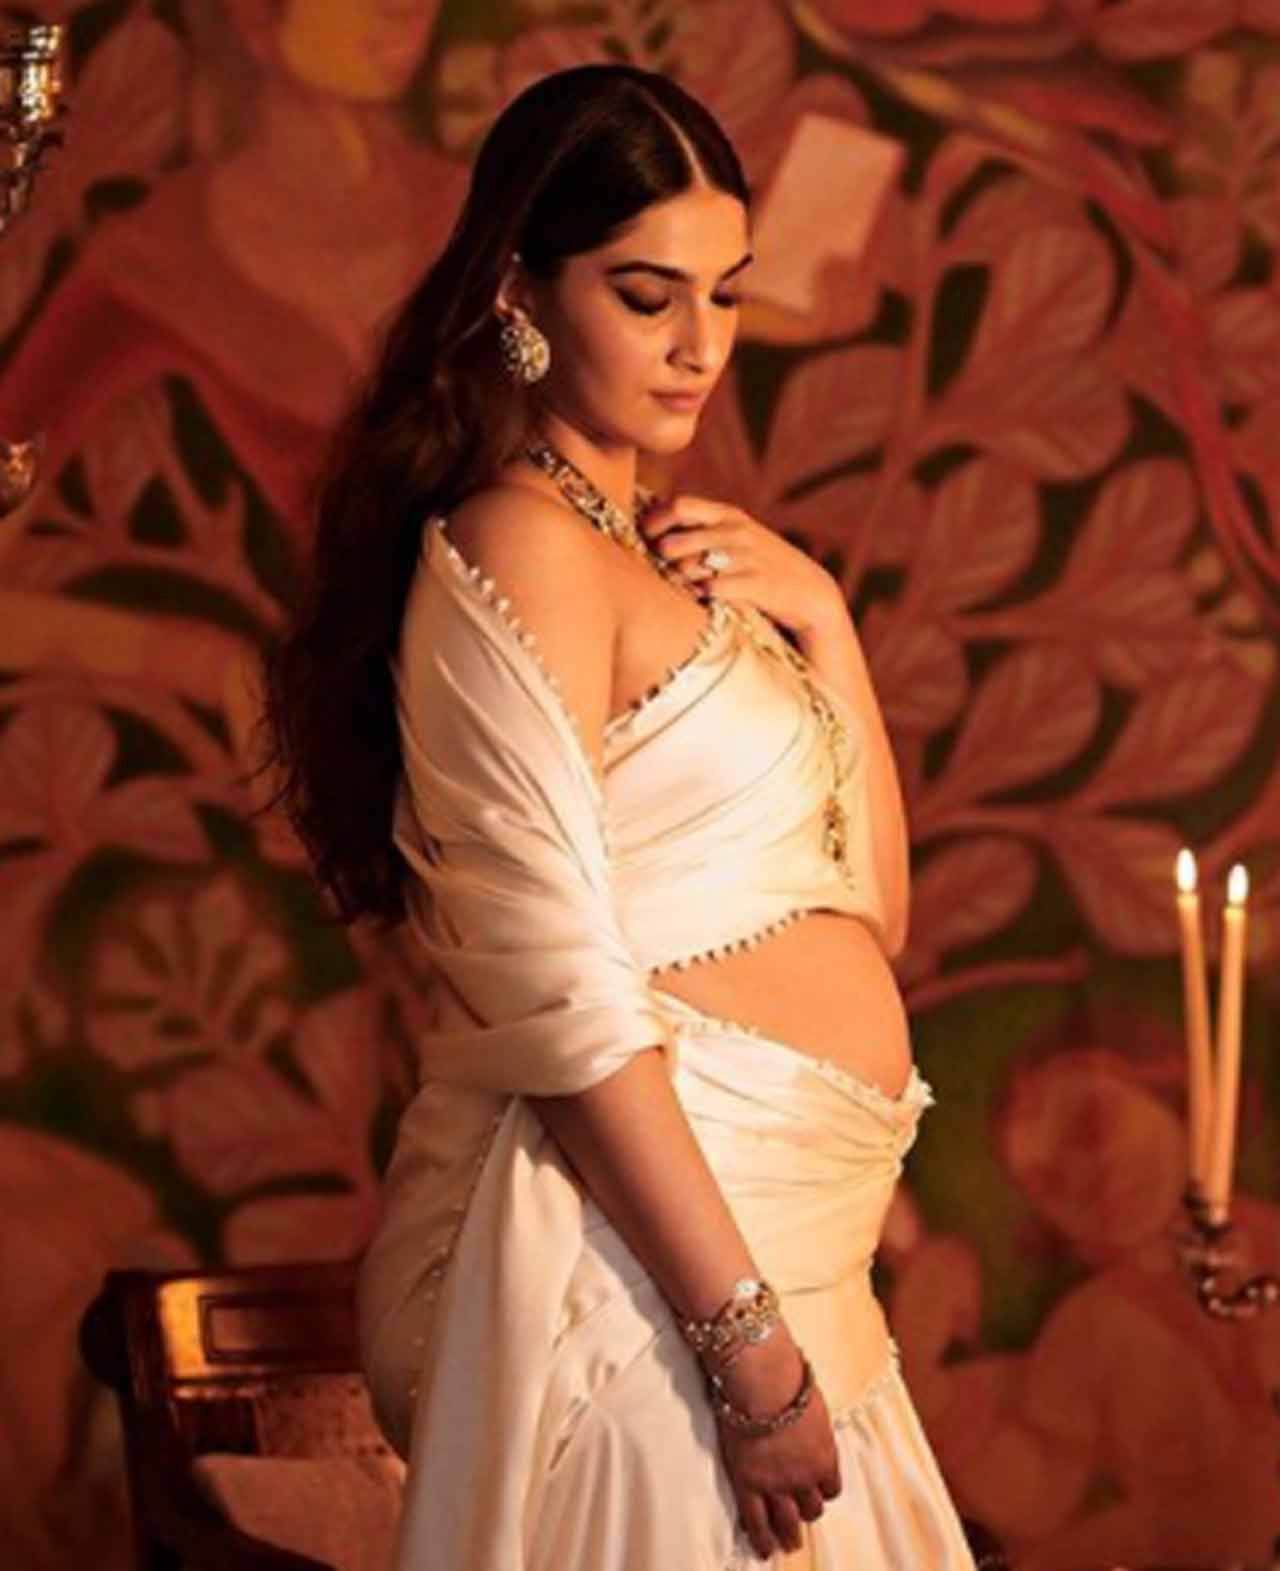 On March 21, in a social media post, Sonam had announced that she and her husband Anand Ahuja will be welcoming their first child this fall. She also shared a few images in which she could be seen cradling her baby bump while lying on the couch with Anand.